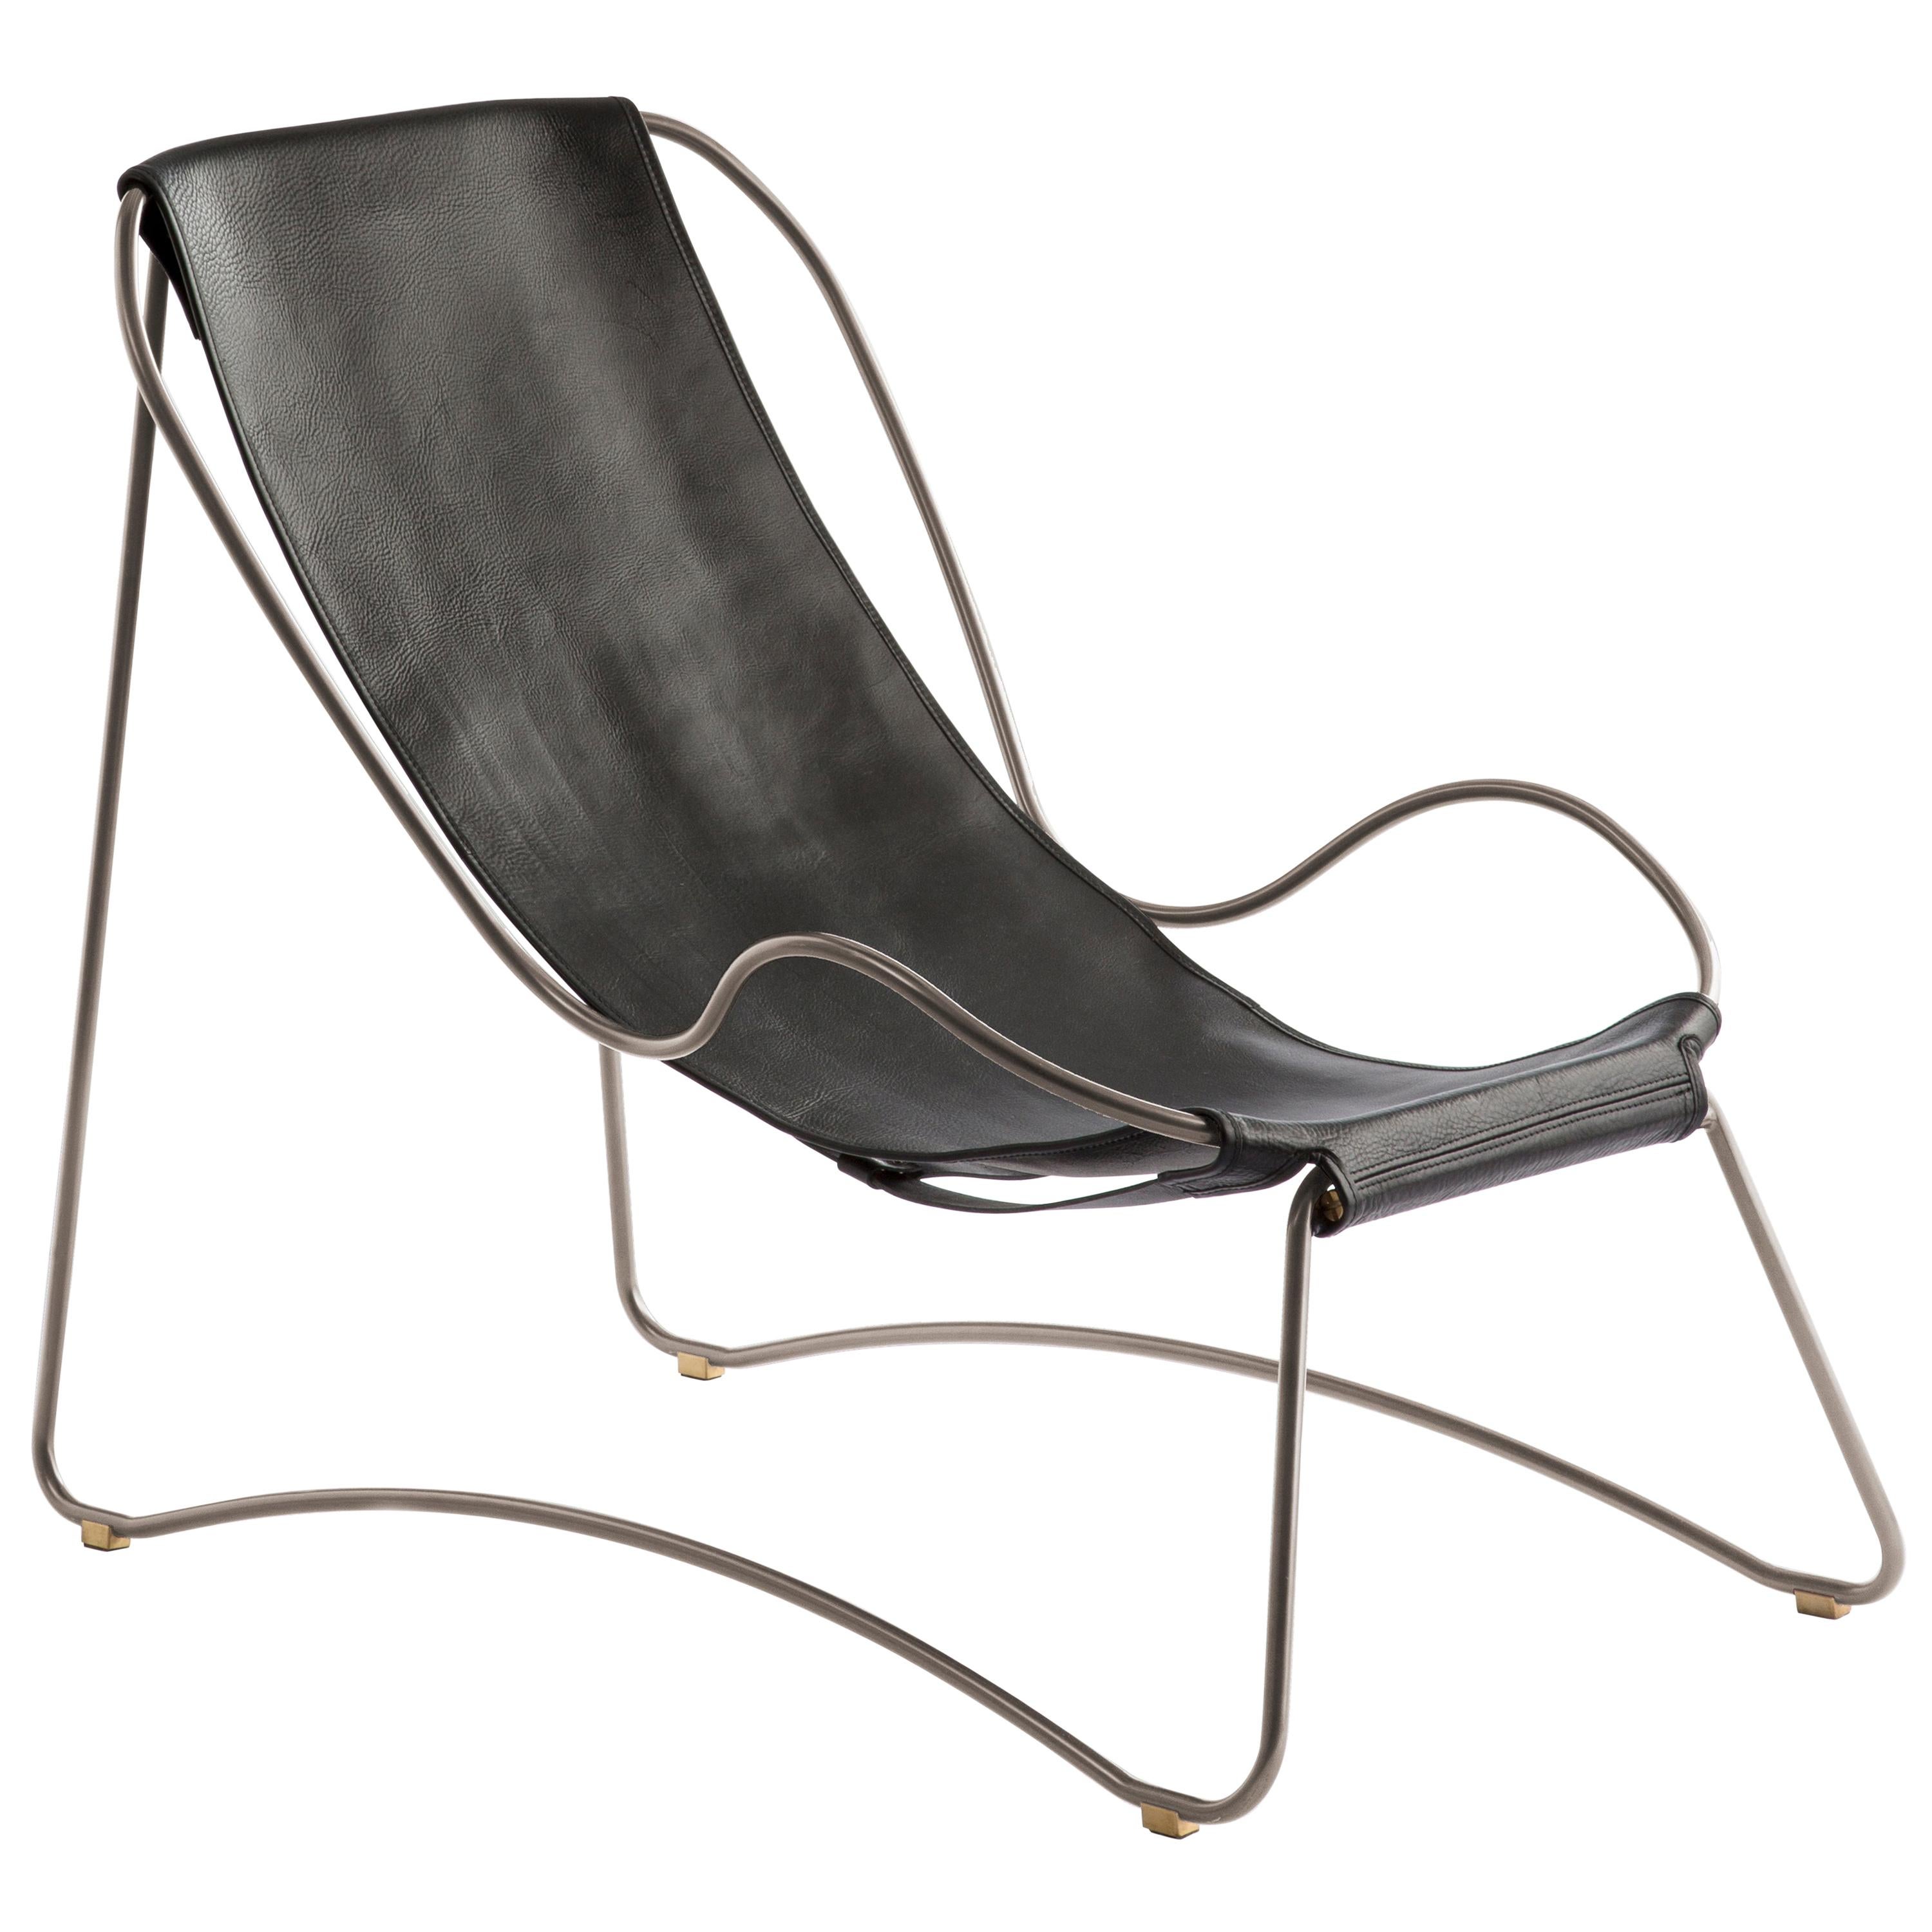 Sculptural Contemporary Artisan Chaise Lounge Old Silver Metal & Black Leather For Sale